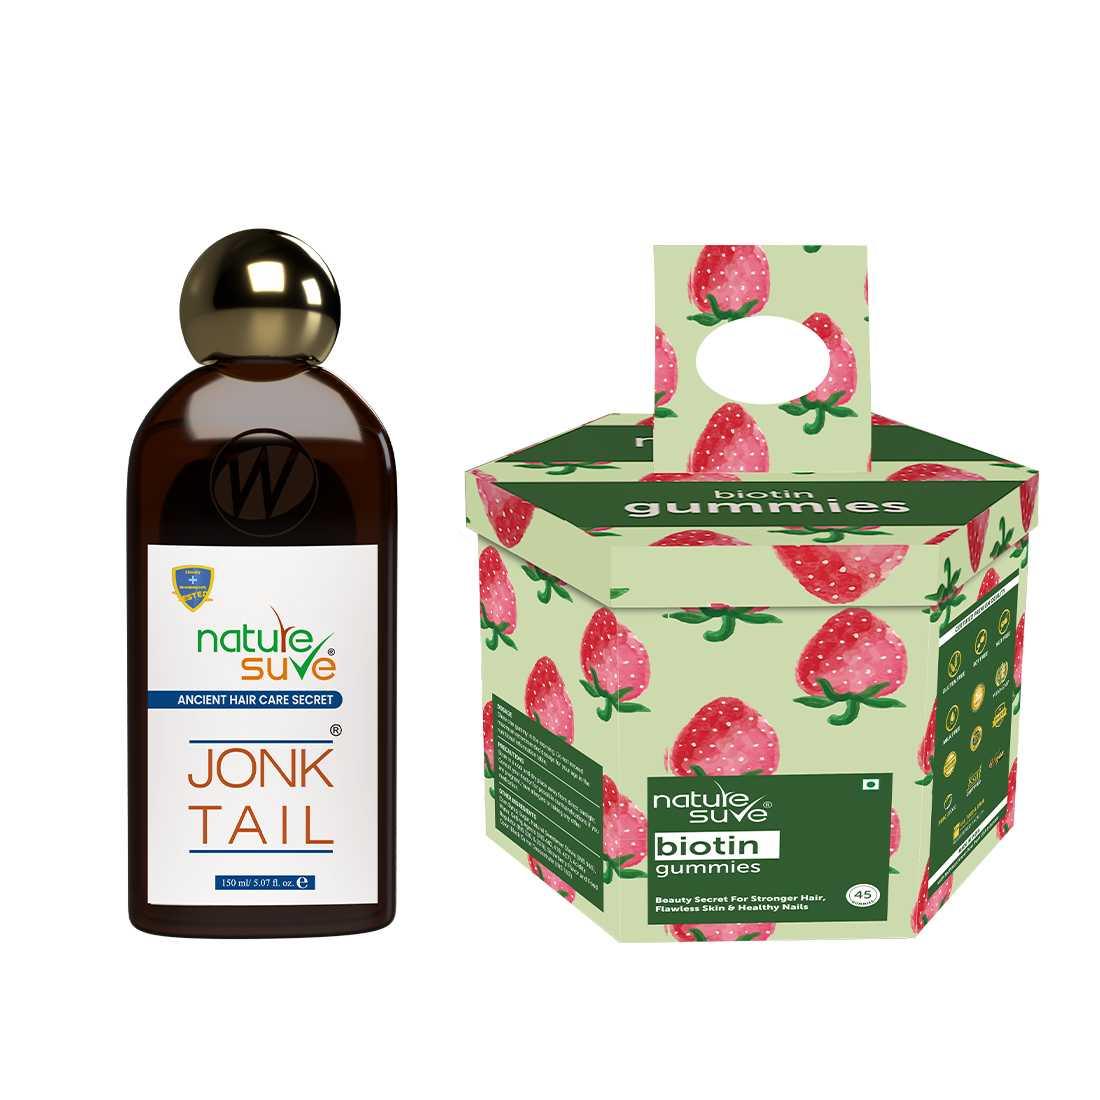 Nature Sure Combo - Jonk Tail Hair Oil 150ml and 45 Biotin Gummies  - Official Brand Store